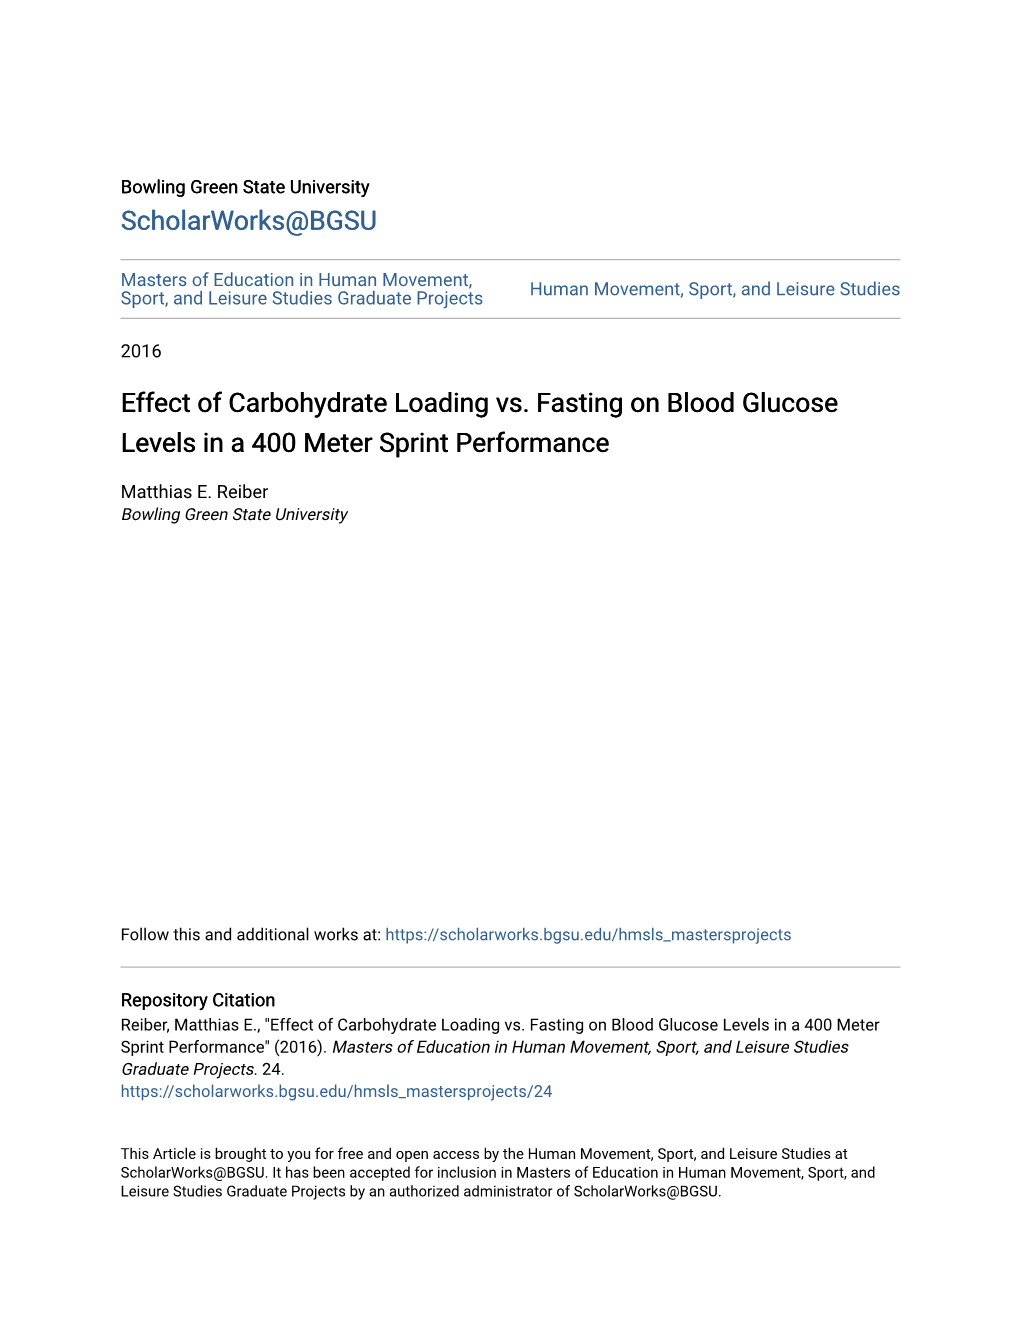 Effect of Carbohydrate Loading Vs. Fasting on Blood Glucose Levels in a 400 Meter Sprint Performance